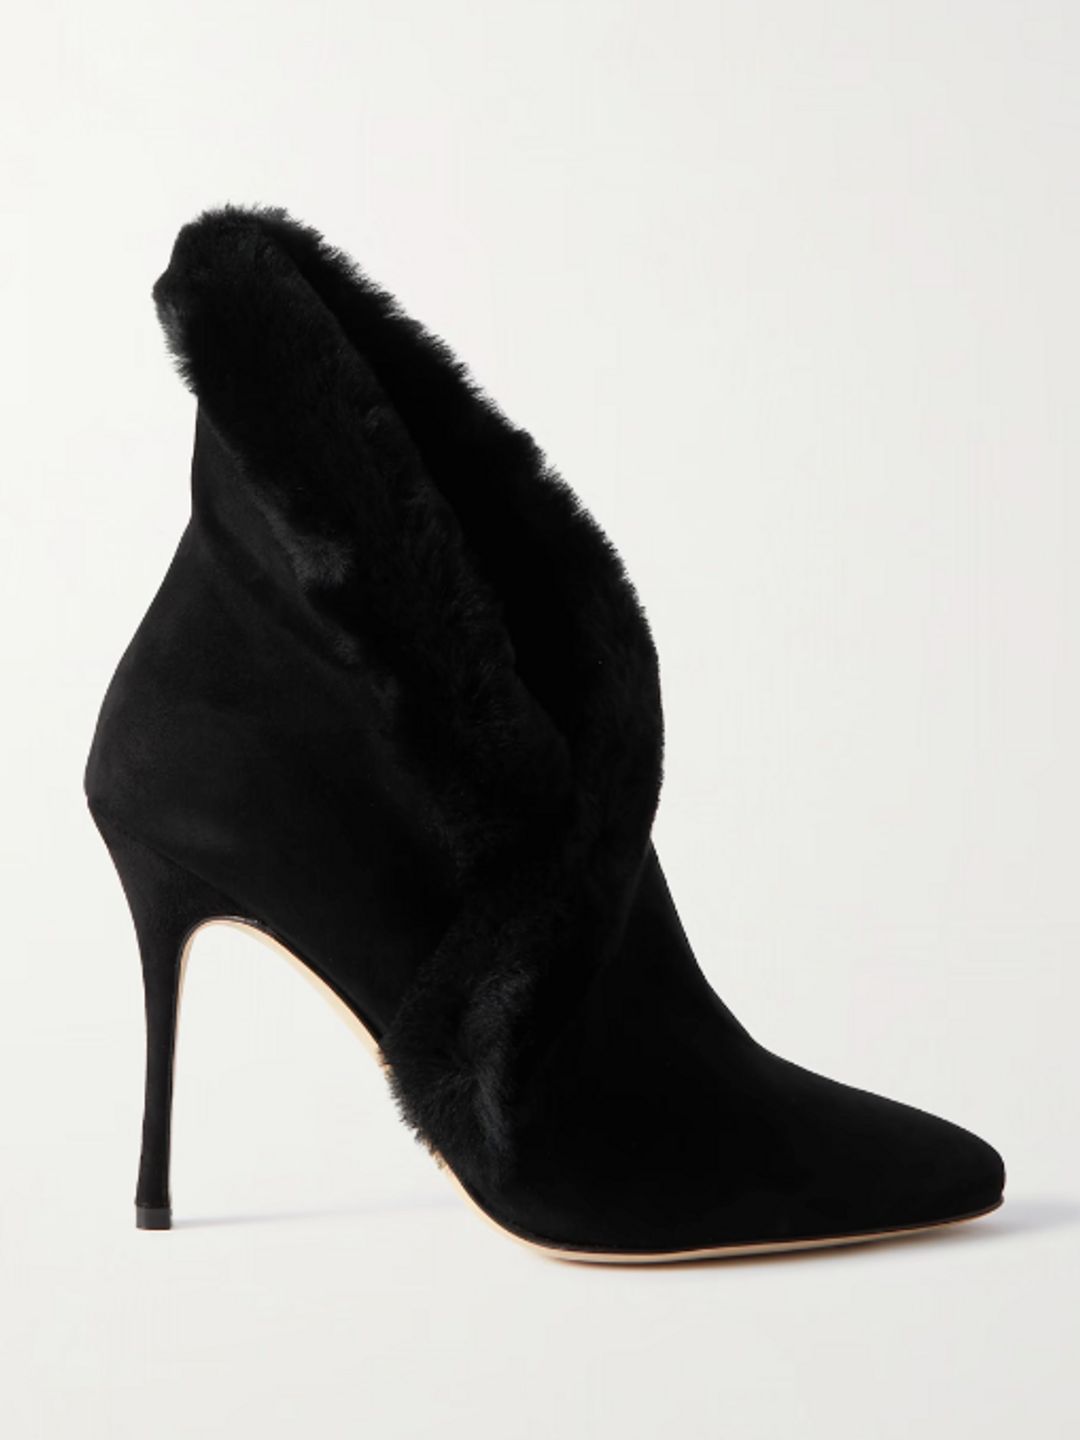 Nestanu 105 shearling-trimmed suede ankle boots